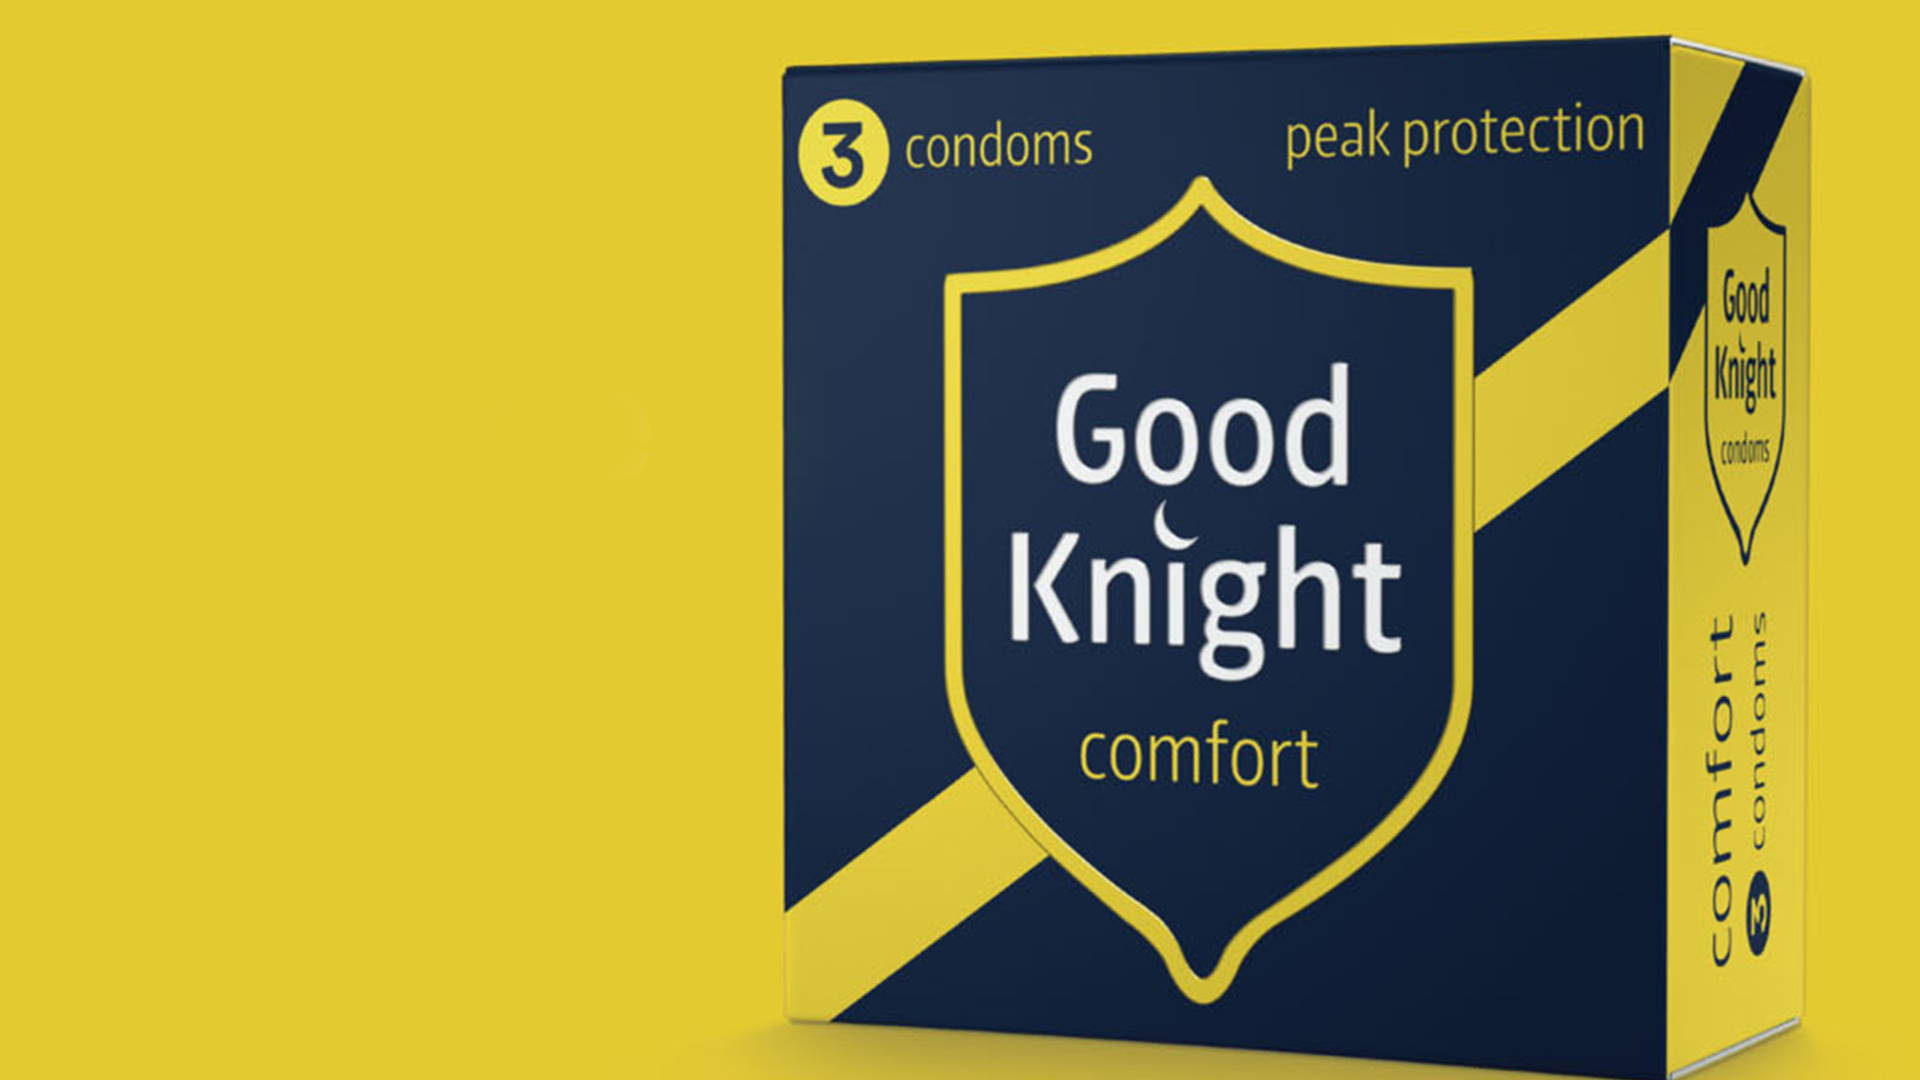 Featured image for Good Knight Condoms